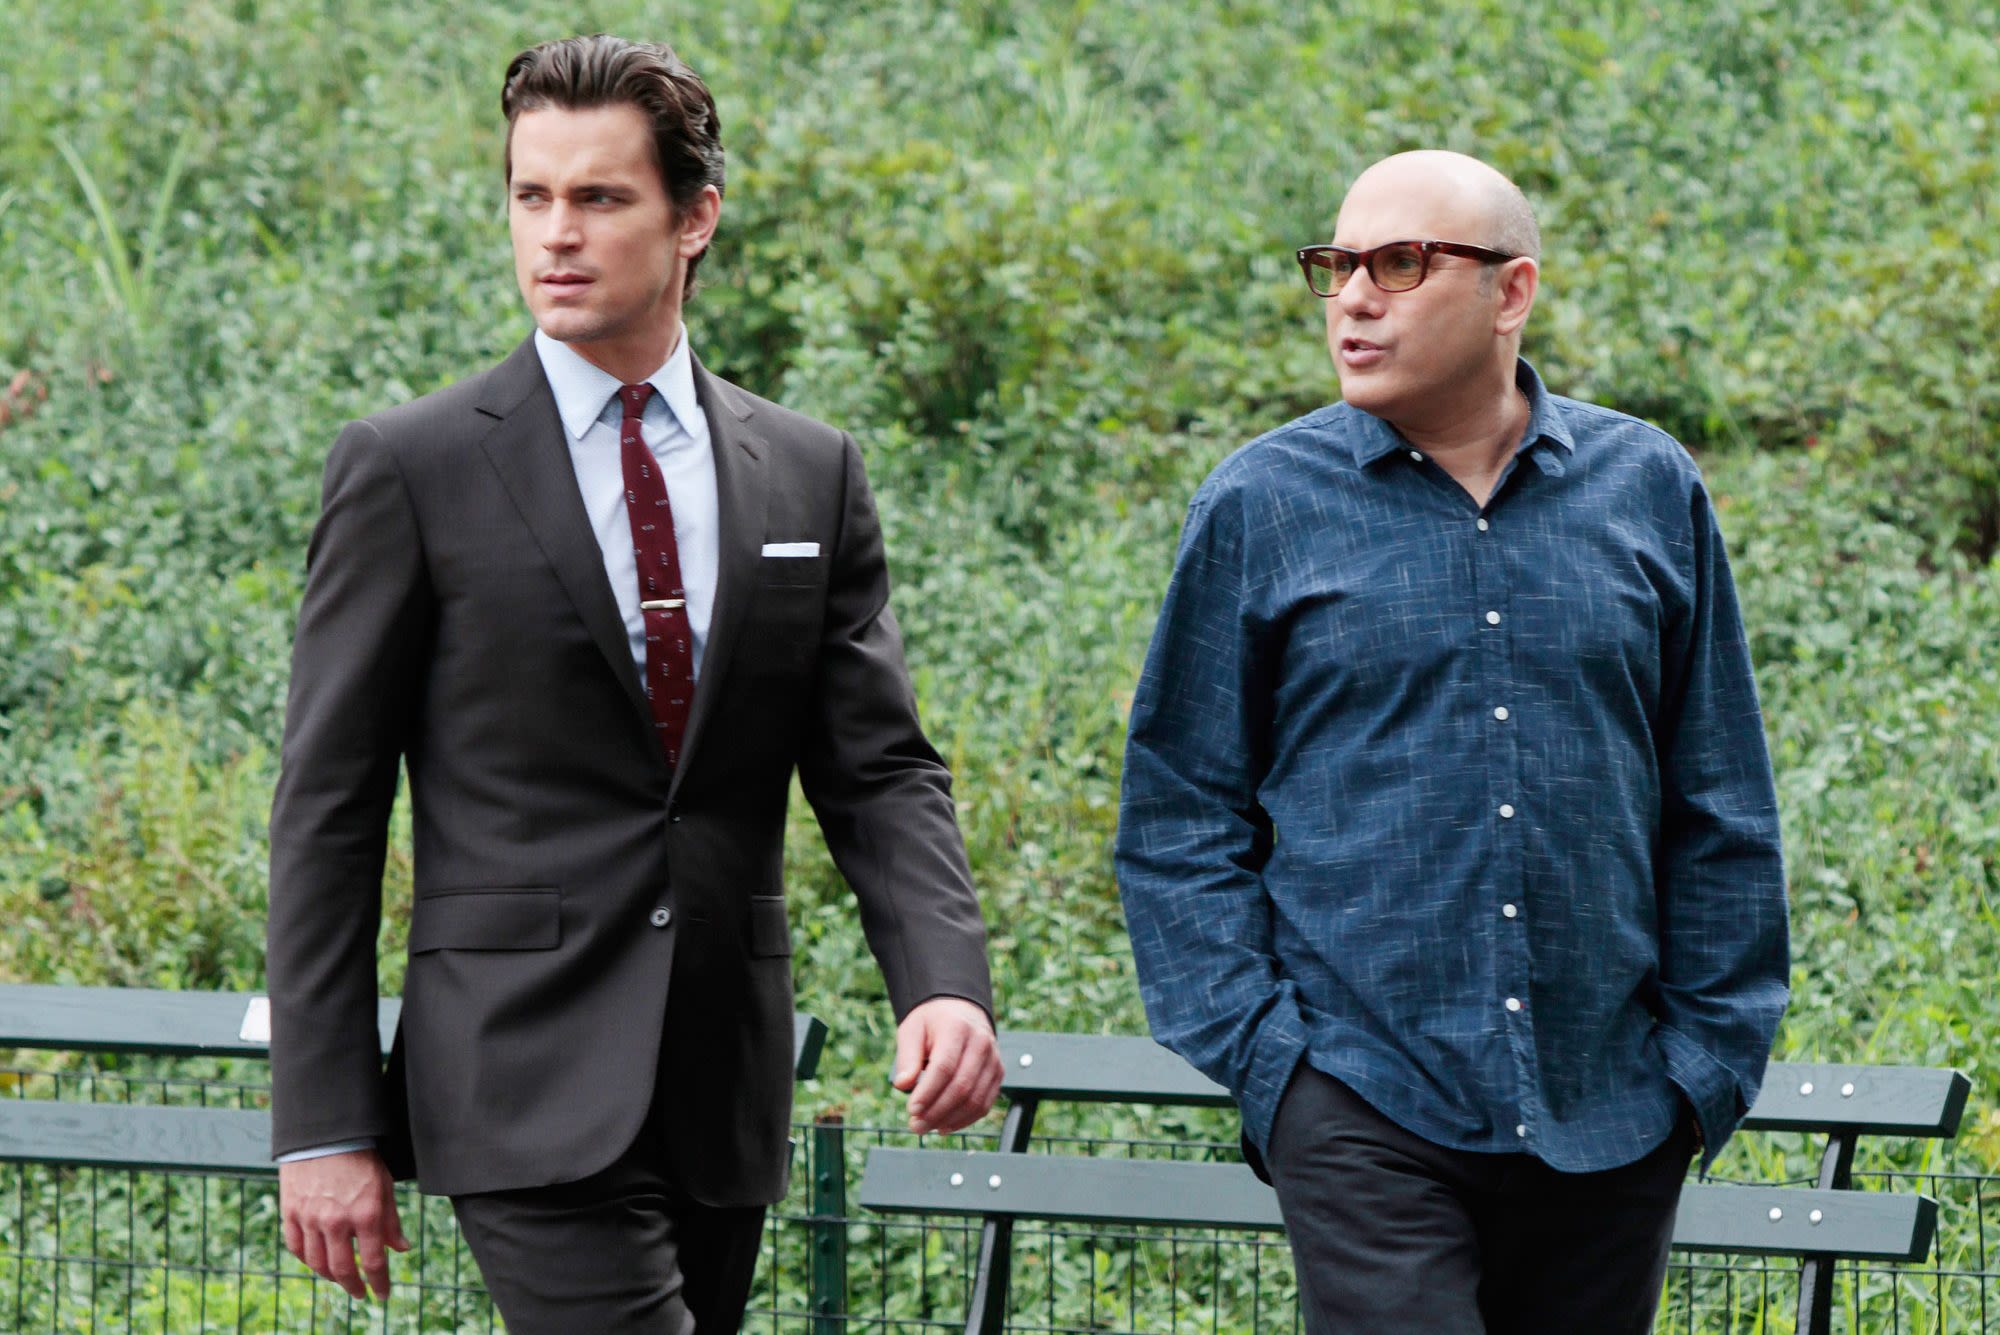 ‘White Collar’ Reboot in the Works, According to Cast and Creator: New Scripts ‘Honor’ Willie Garson ‘In a Profound Way’ (EXCLUSIVE)